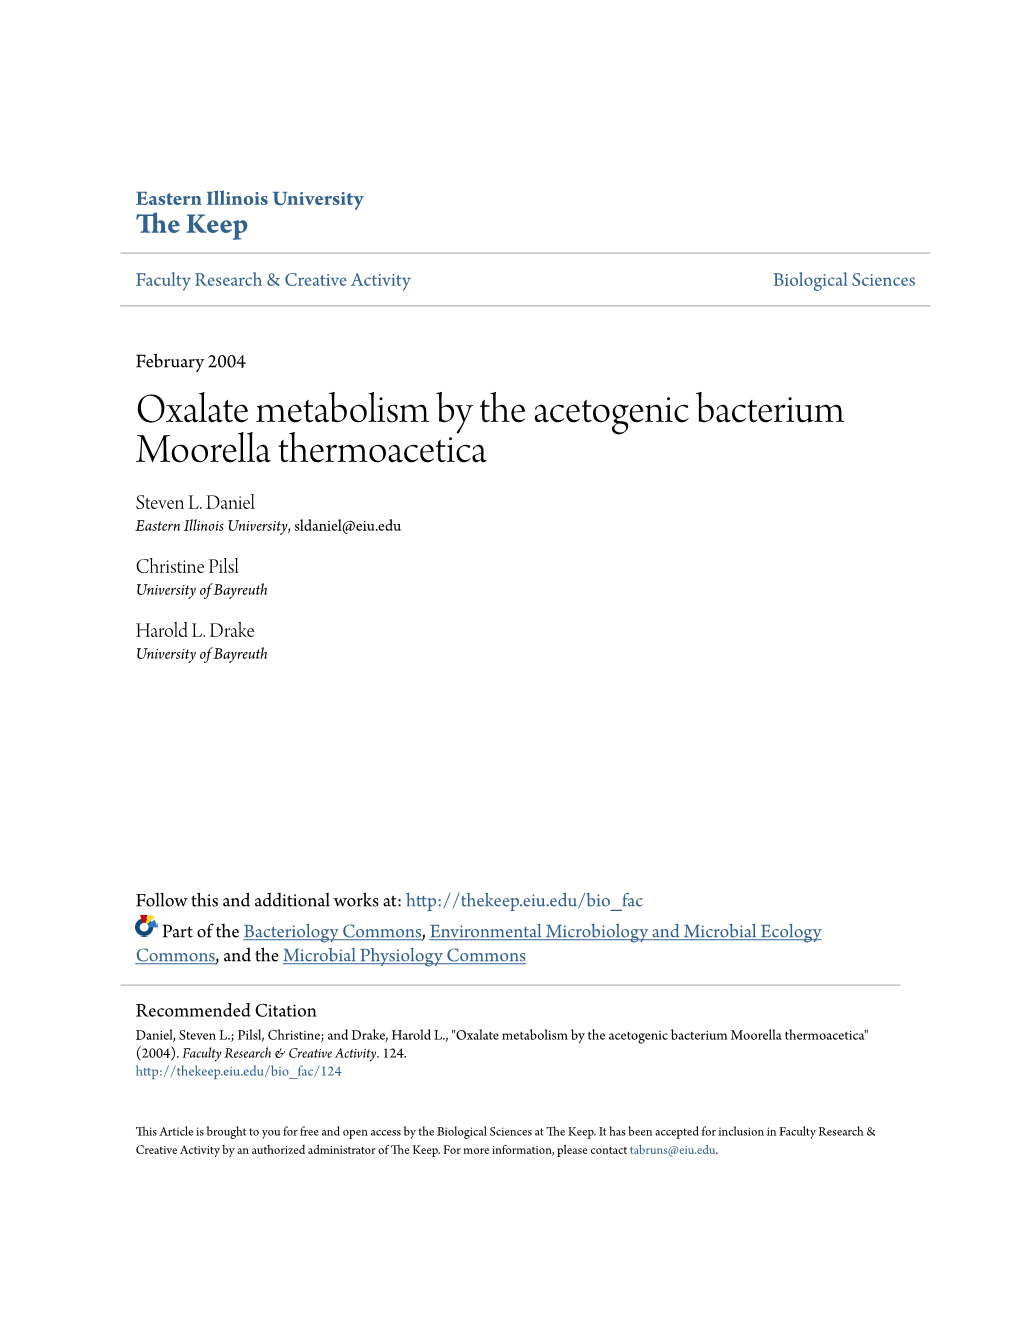 Oxalate Metabolism by the Acetogenic Bacterium Moorella Thermoacetica Steven L